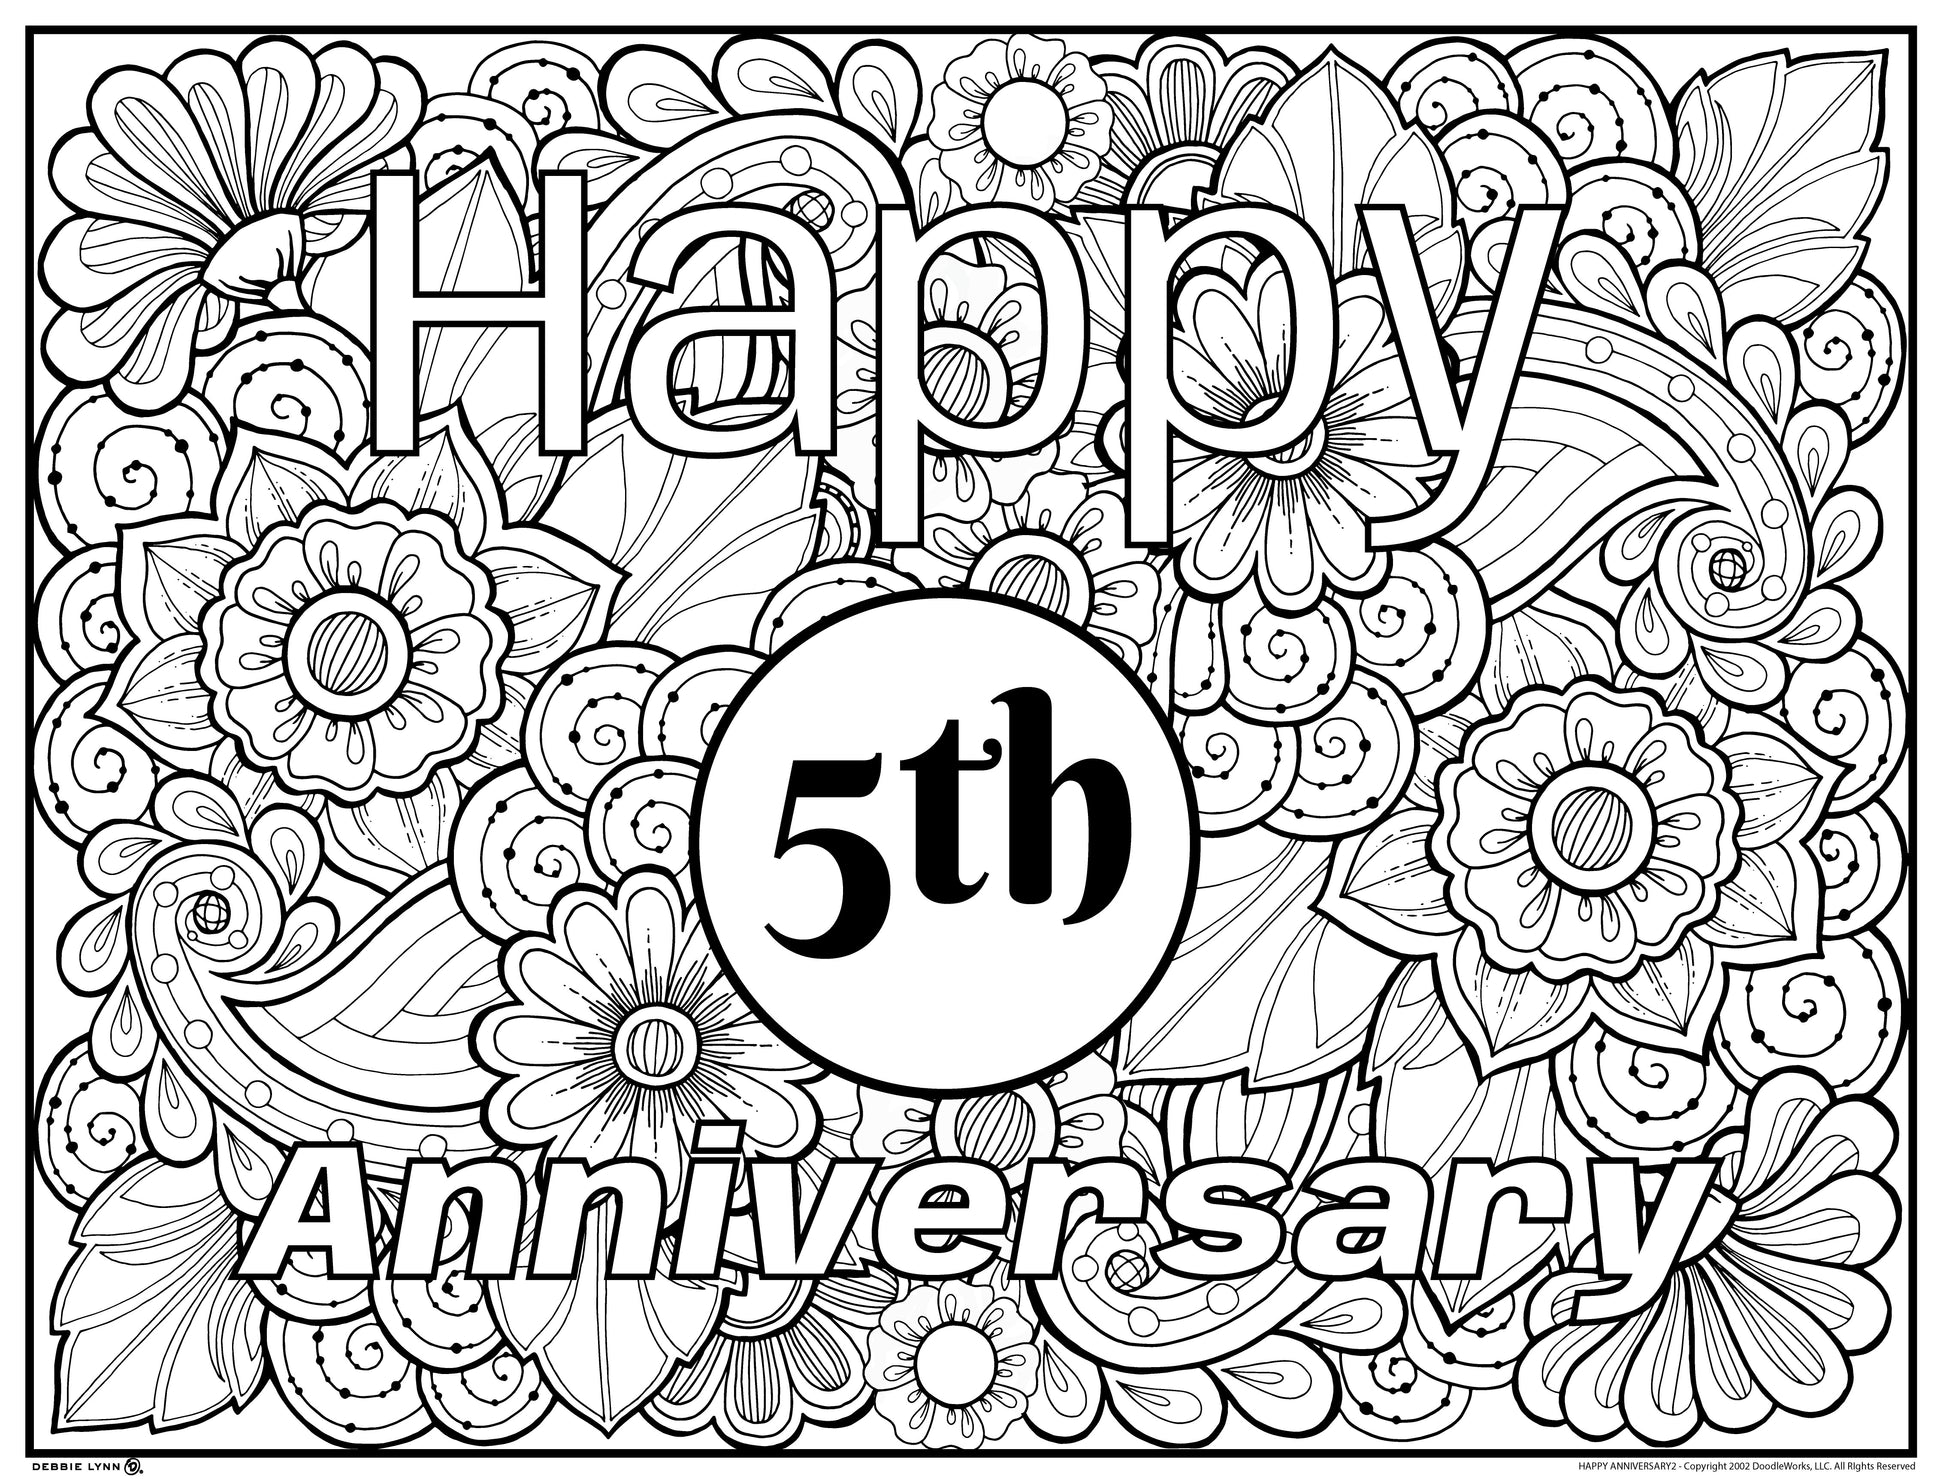 Anniversary flowers personalized giant coloring poster x â debbie lynn